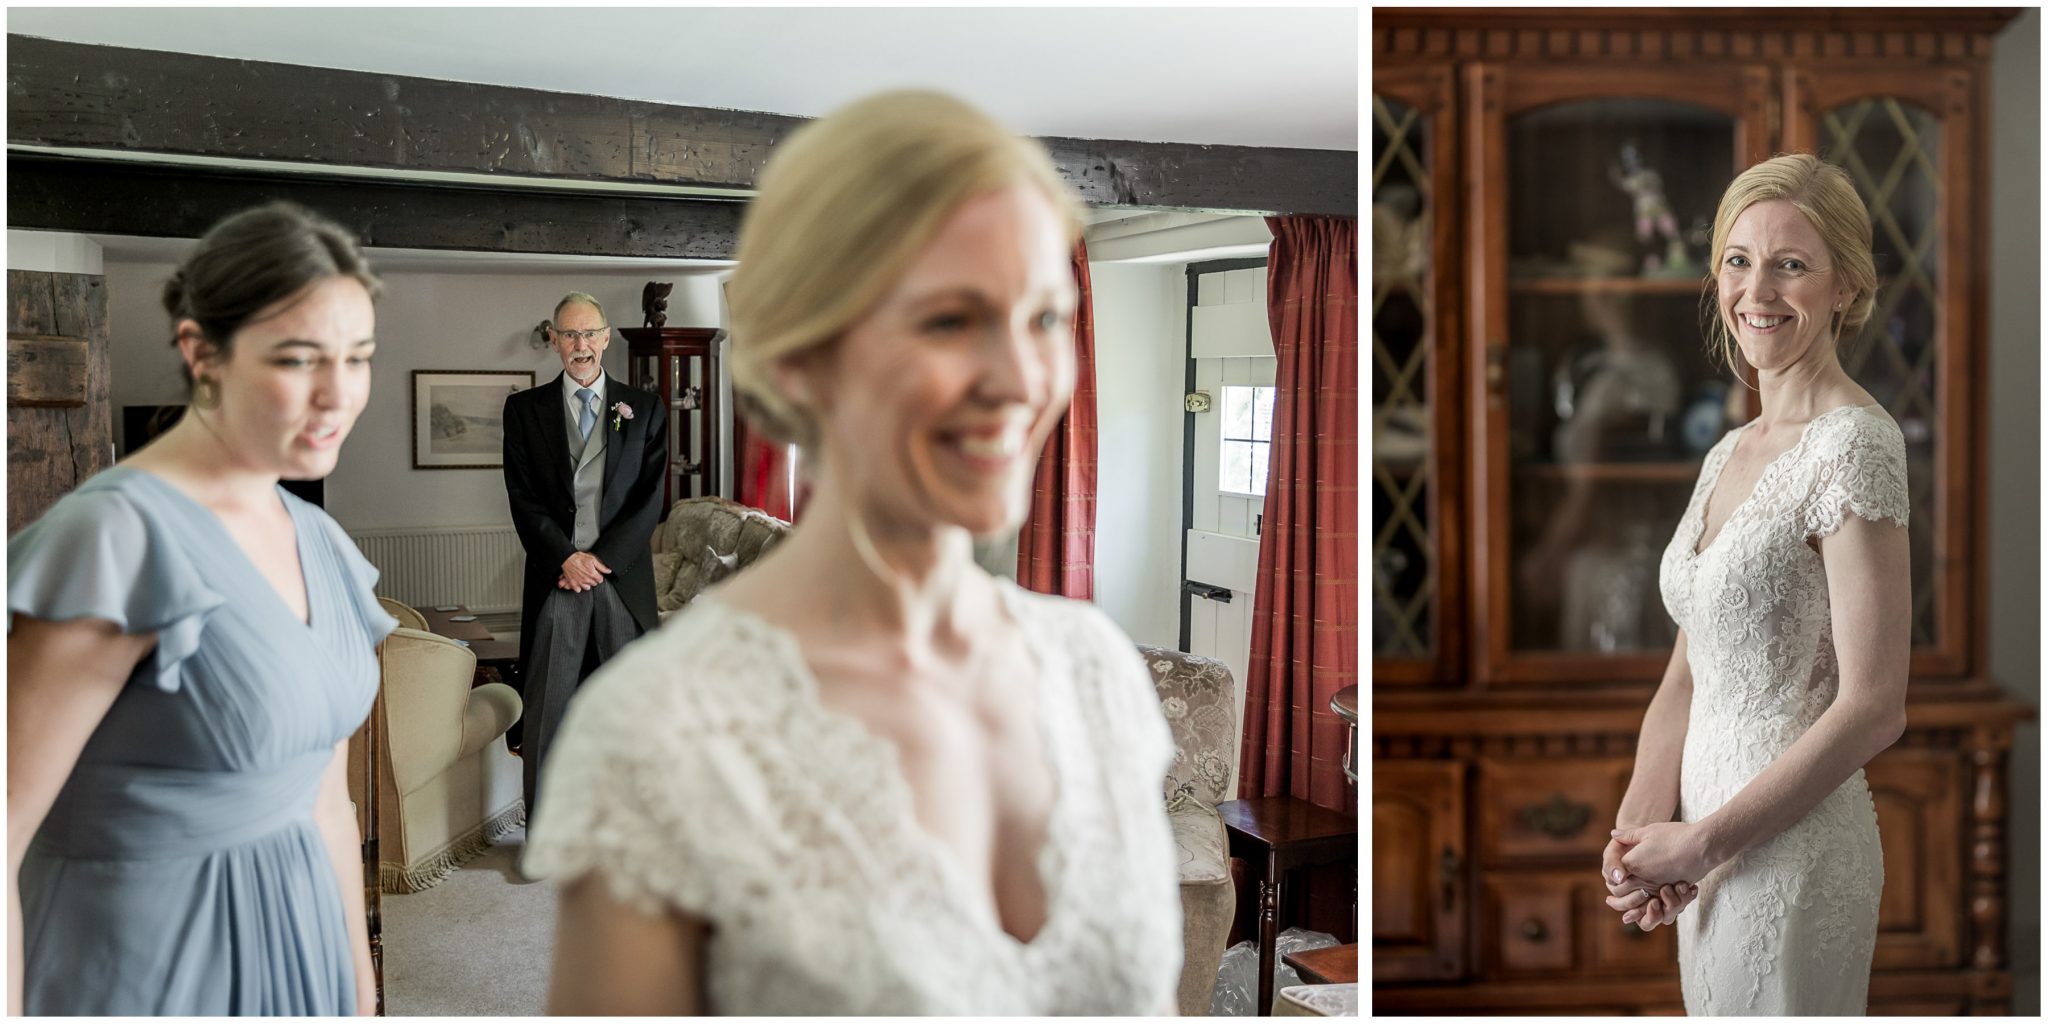 The father of the bride sees his daughter in her wedding dress for the first time